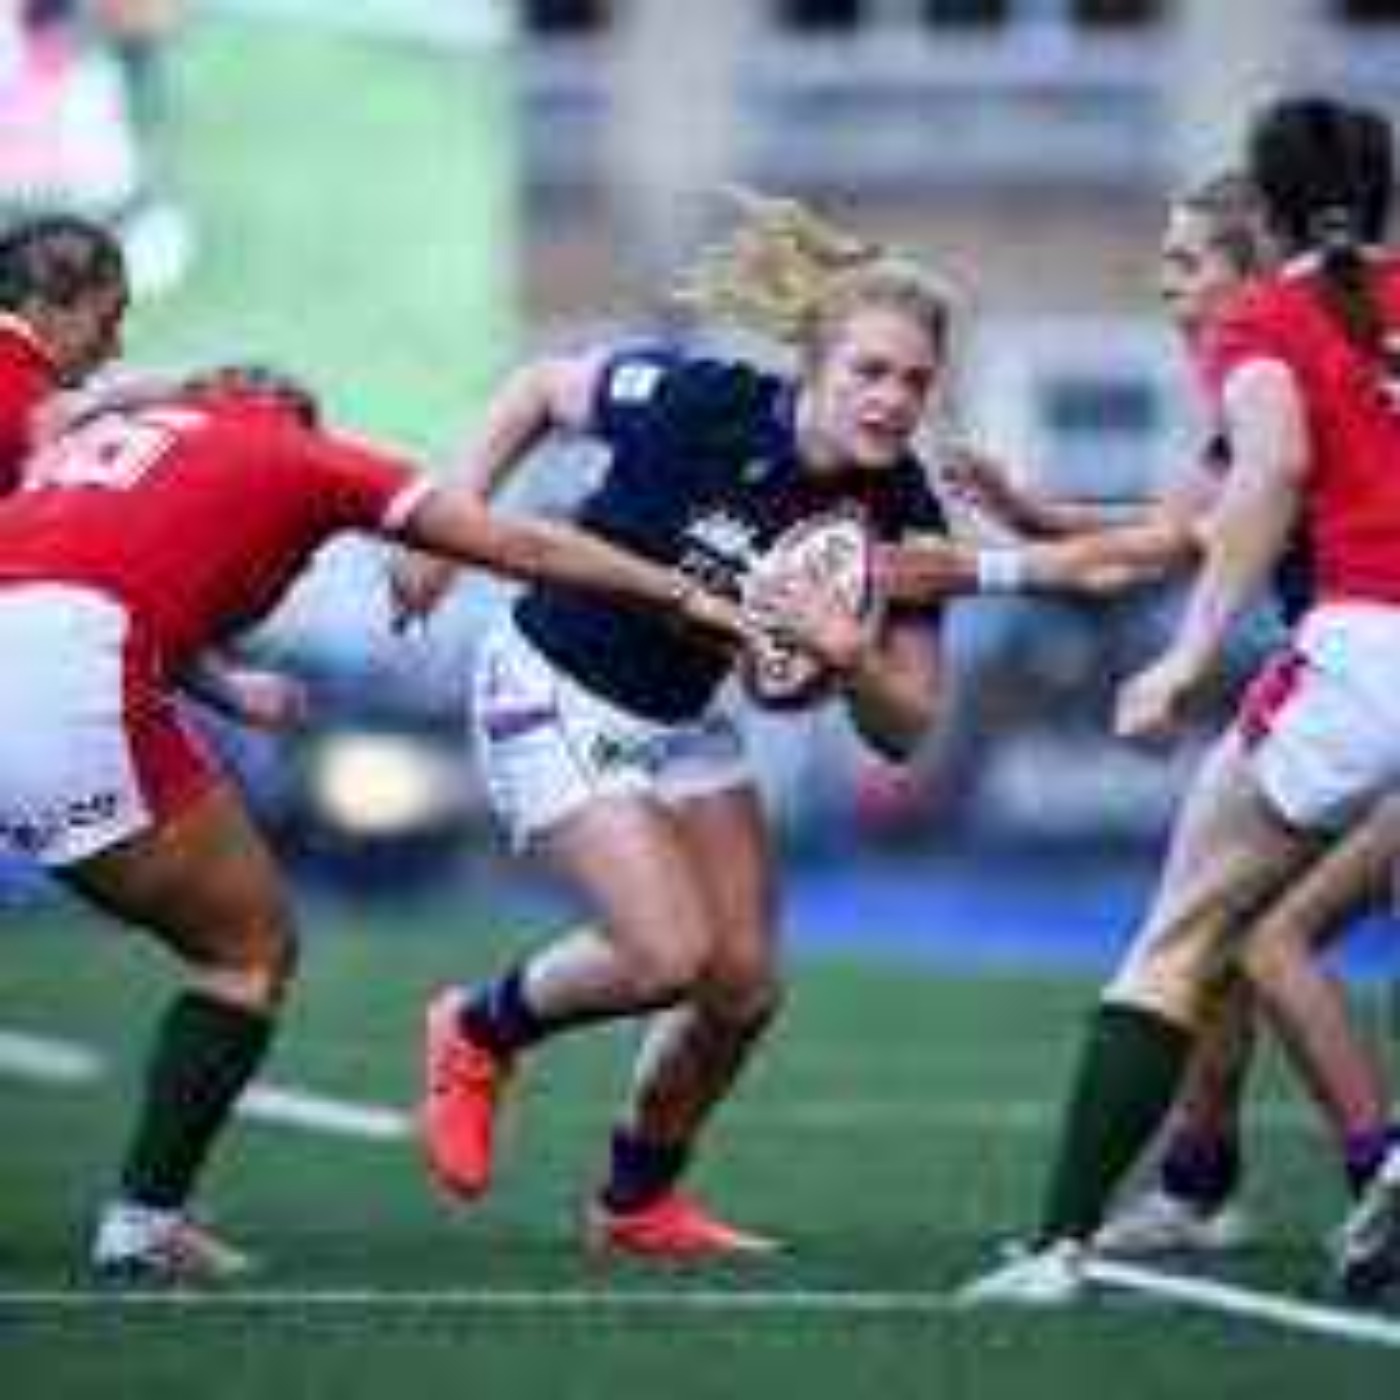 Watch WOMEN’S RUGBY WORLD CUP 2022 LIVE STREAM FREE Online TV COVERAGE on acast